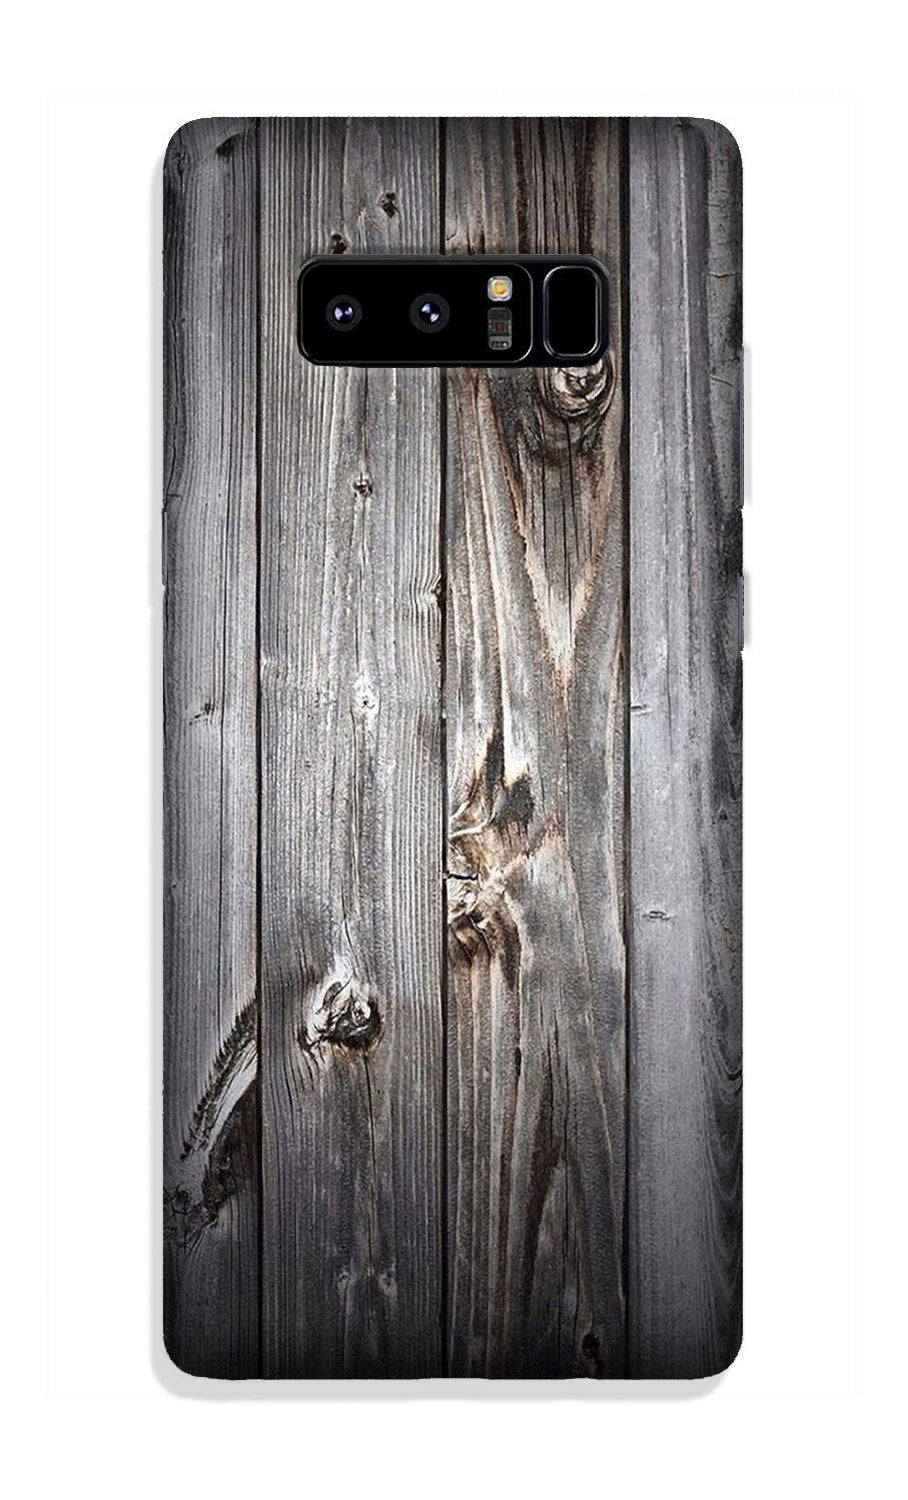 Wooden Look Case for Galaxy Note 8(Design - 114)